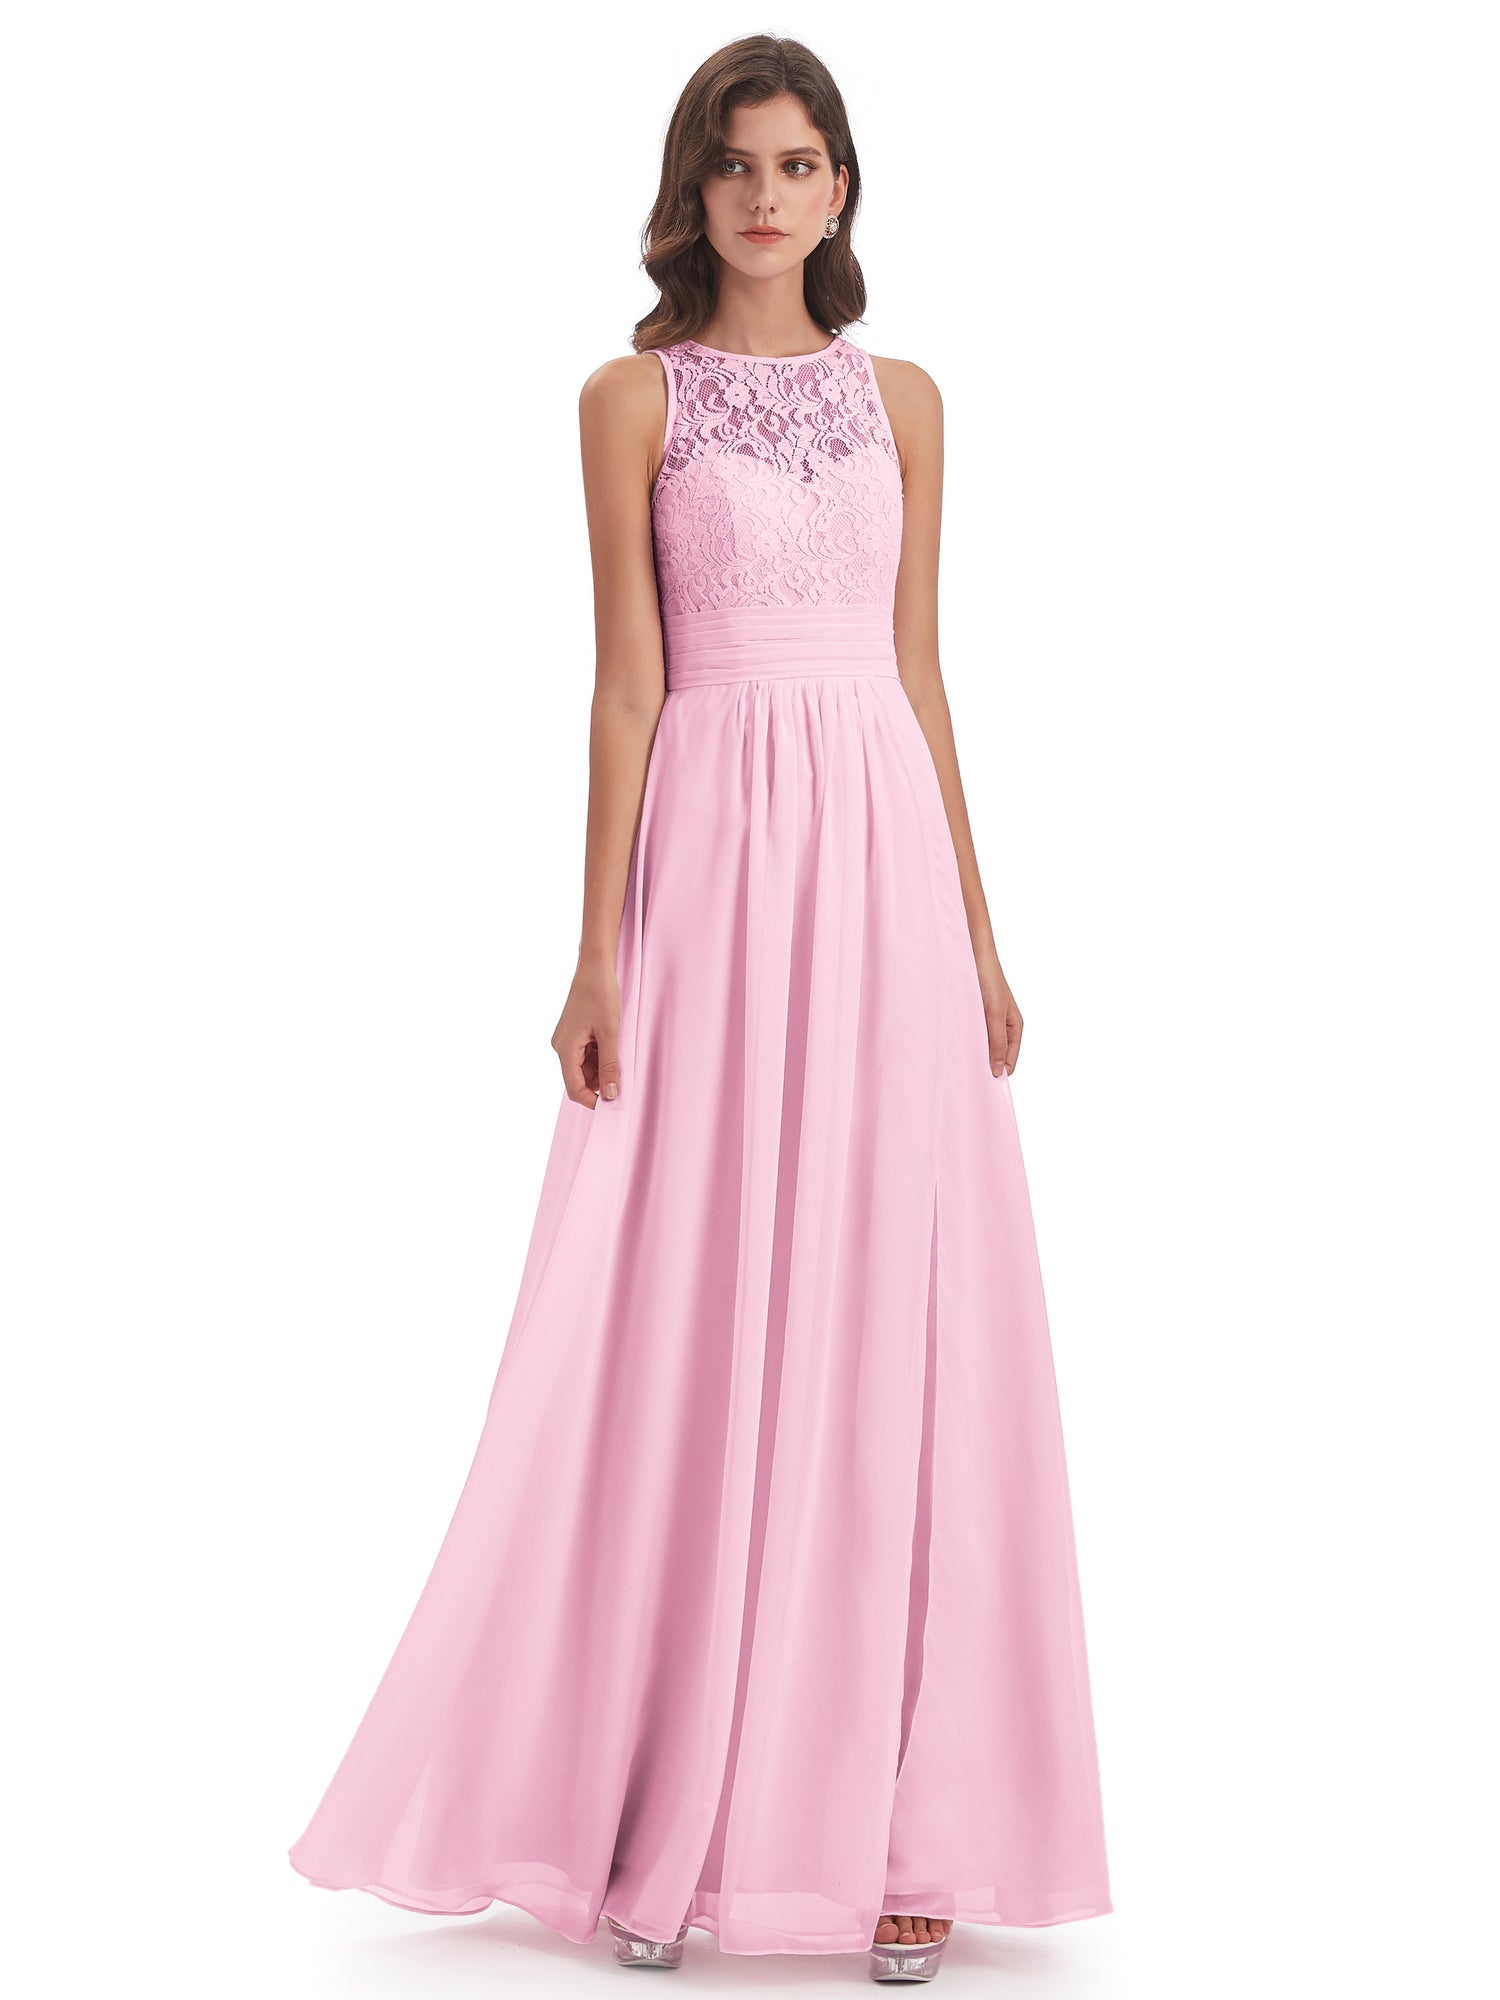 Candy Pink Bridesmaid Dresses